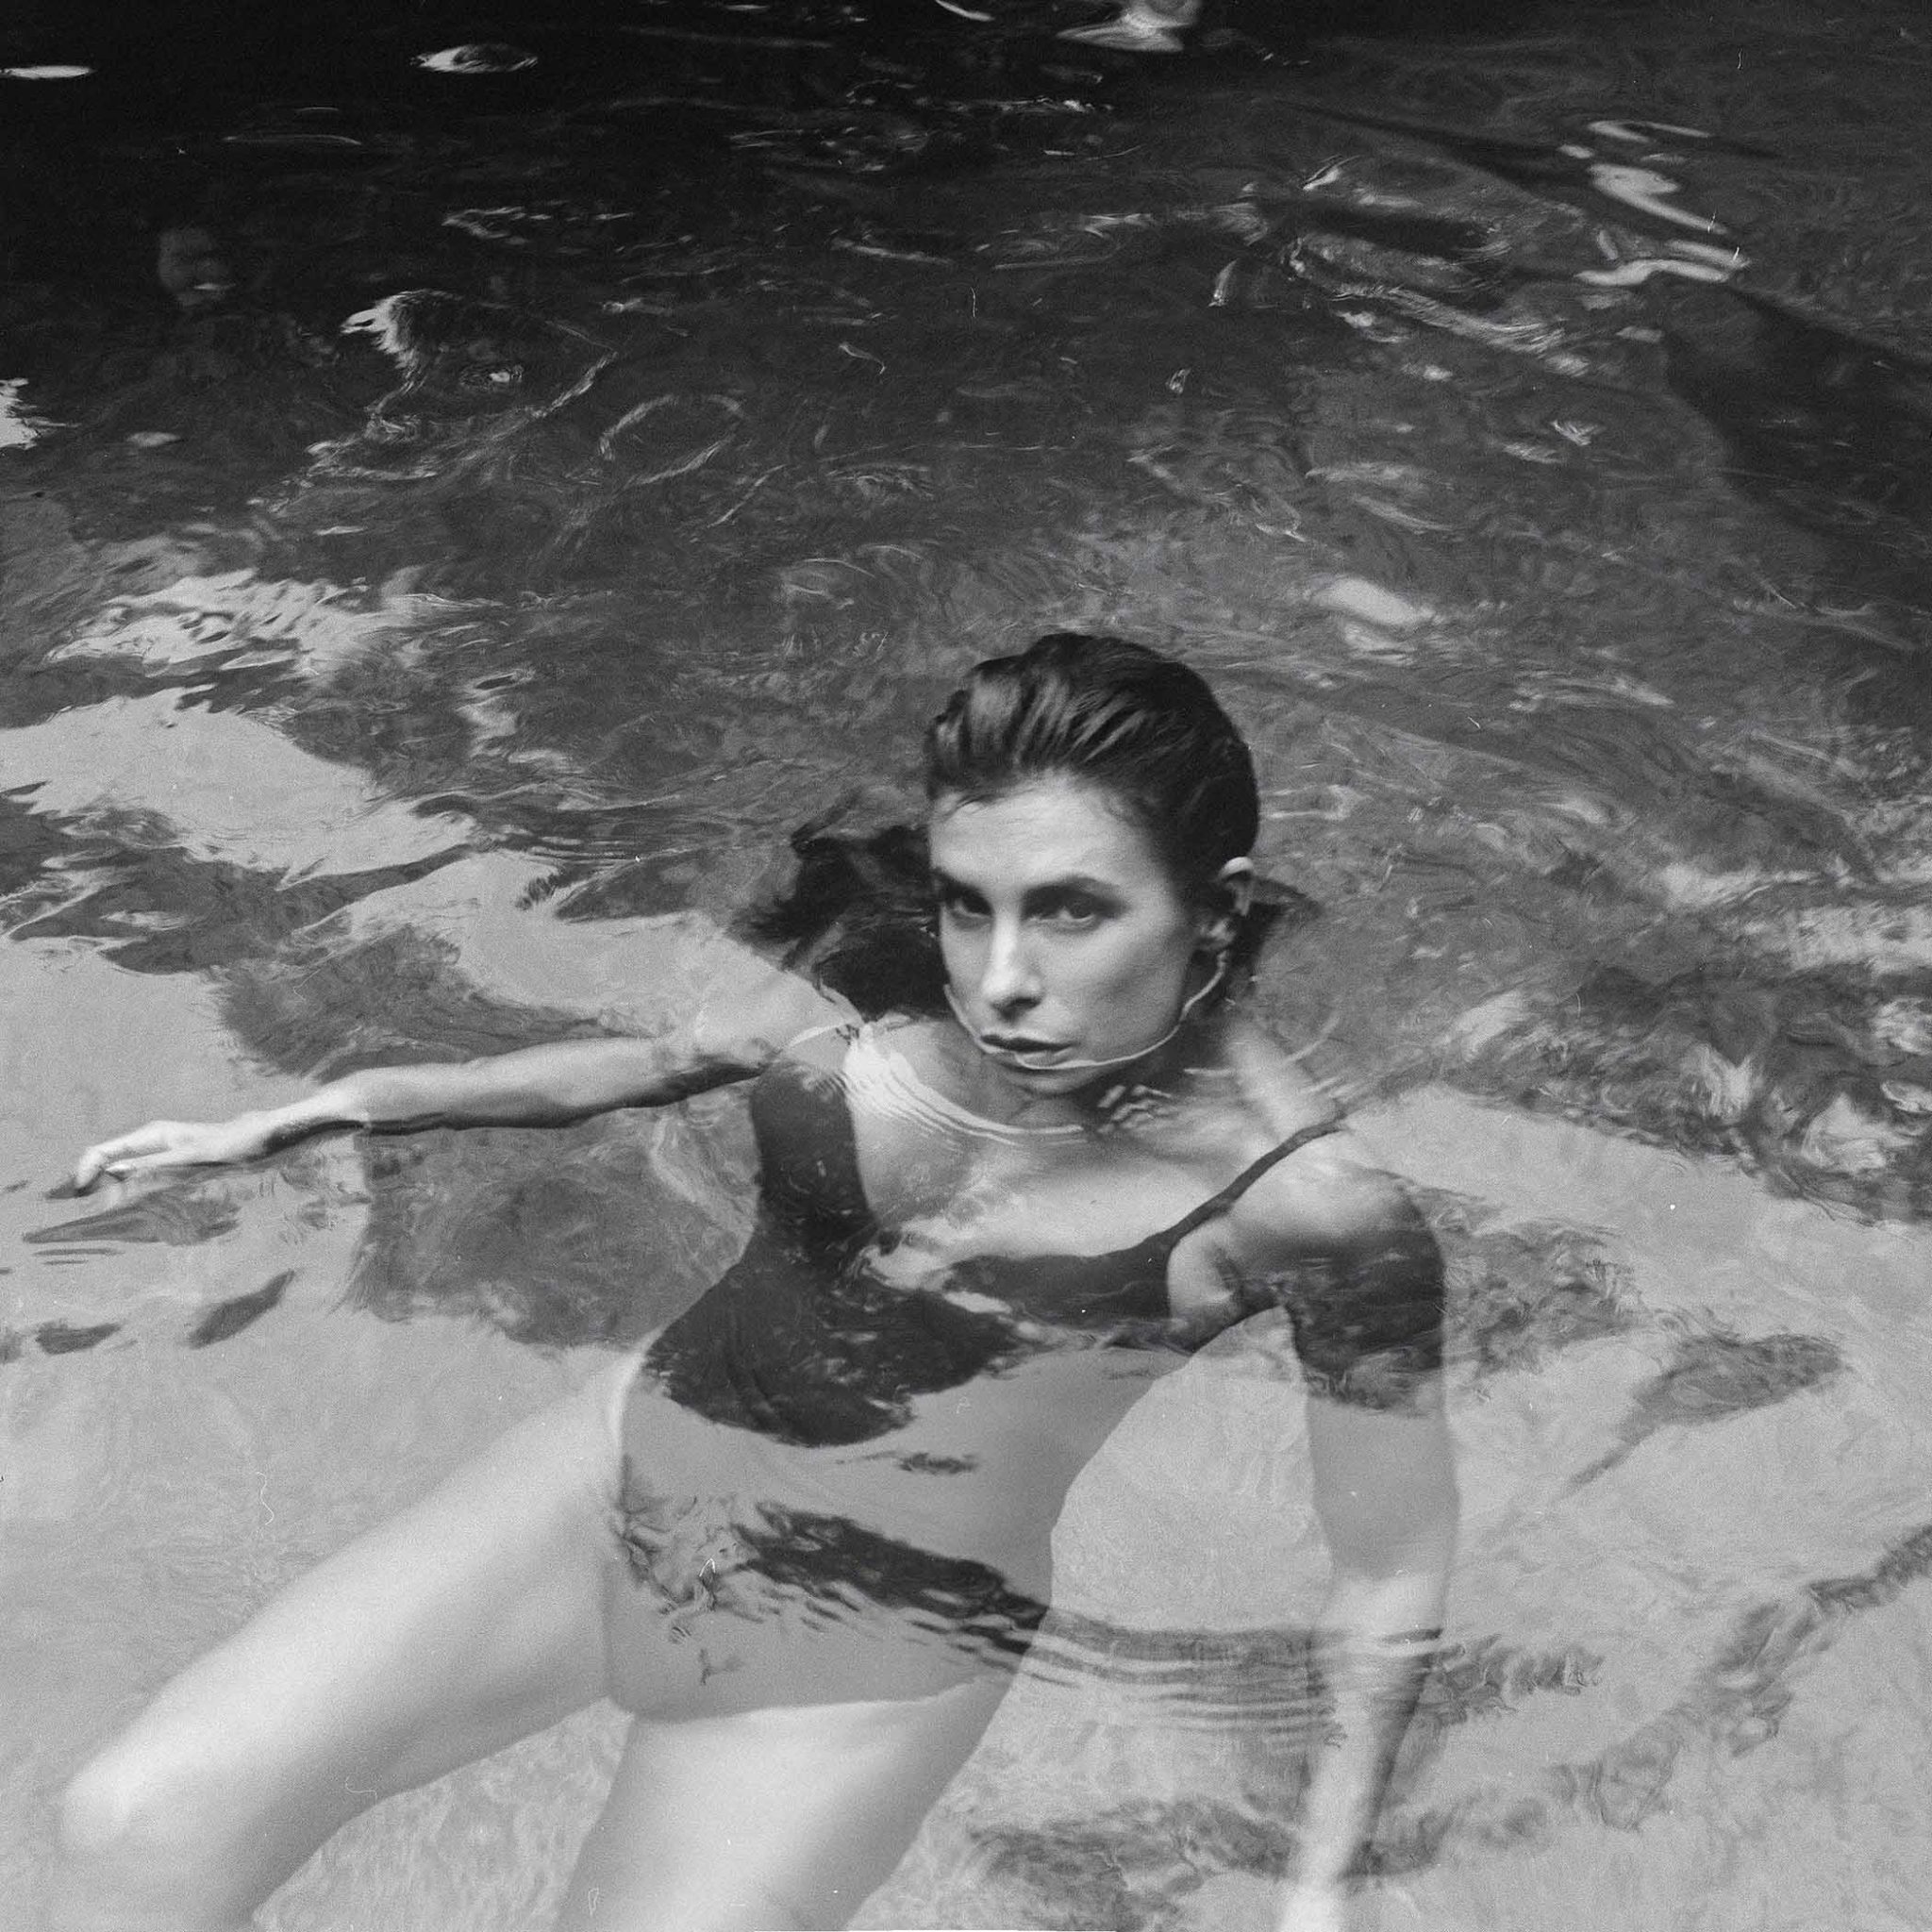 Elisabetta Canalis swimming in the pool.